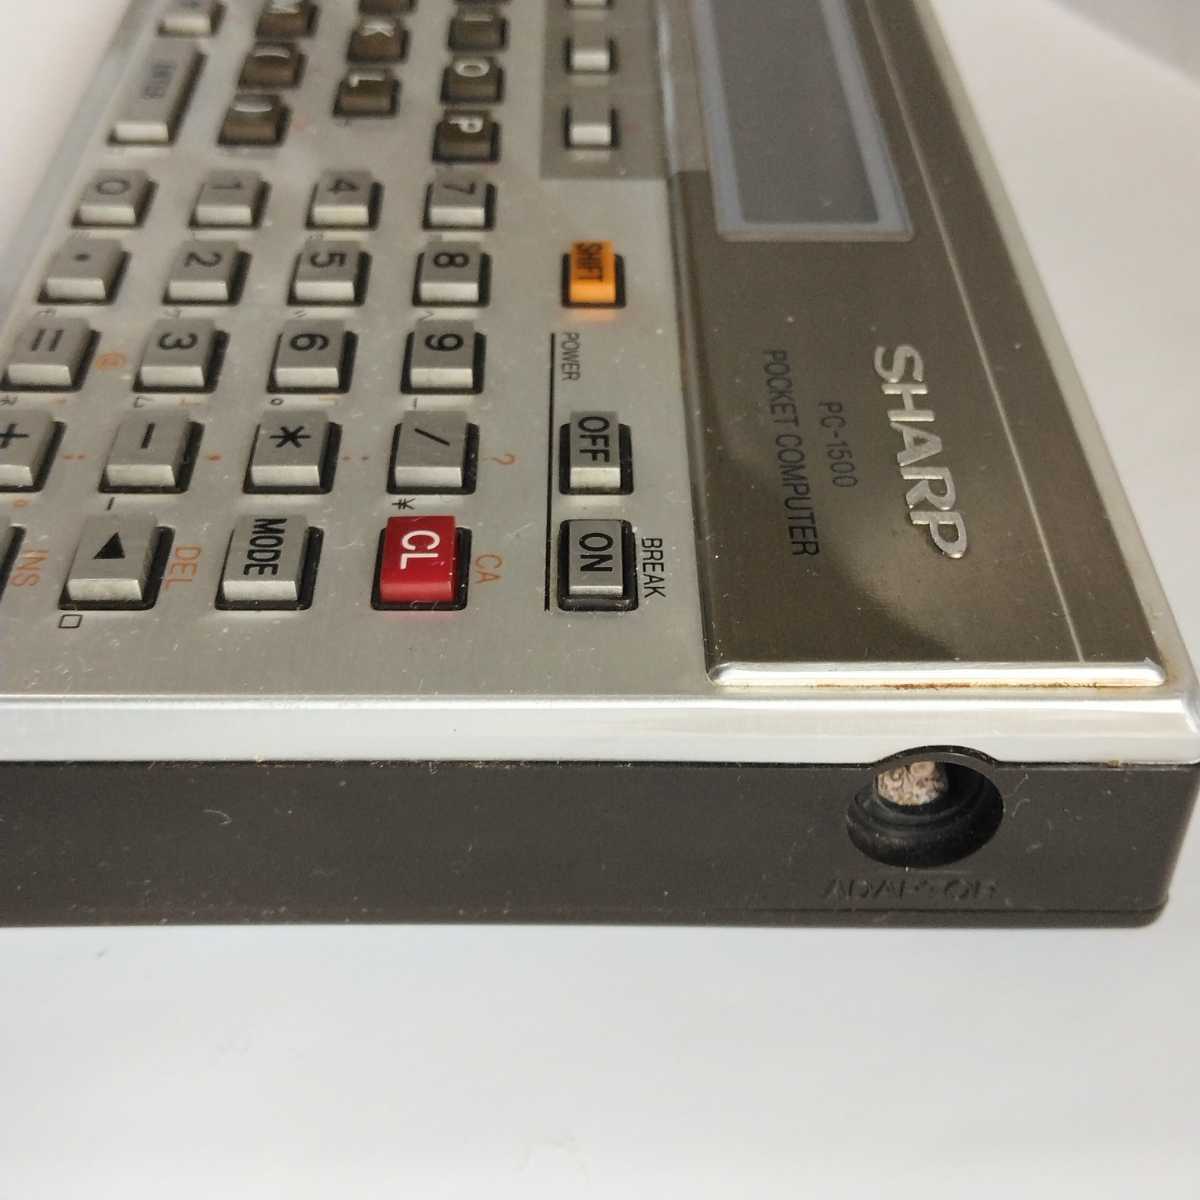 SHARP pocket computer -PC-1500 operation goods, but with defect 